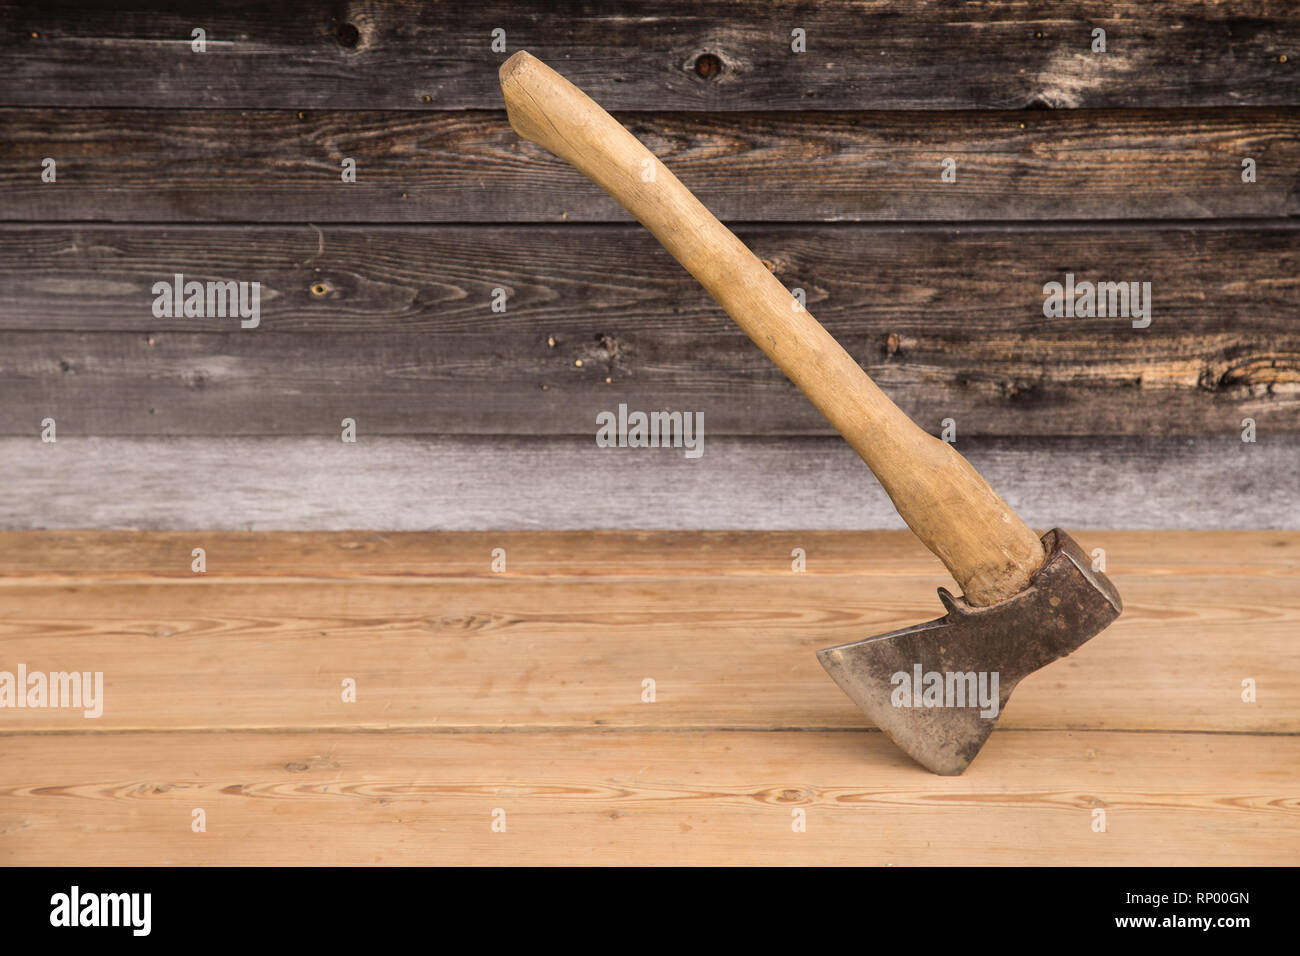 Old ax with a wooden handle stuck in wooden log. Concept for woodworking or deforestation. Selective focus. Stock Photo